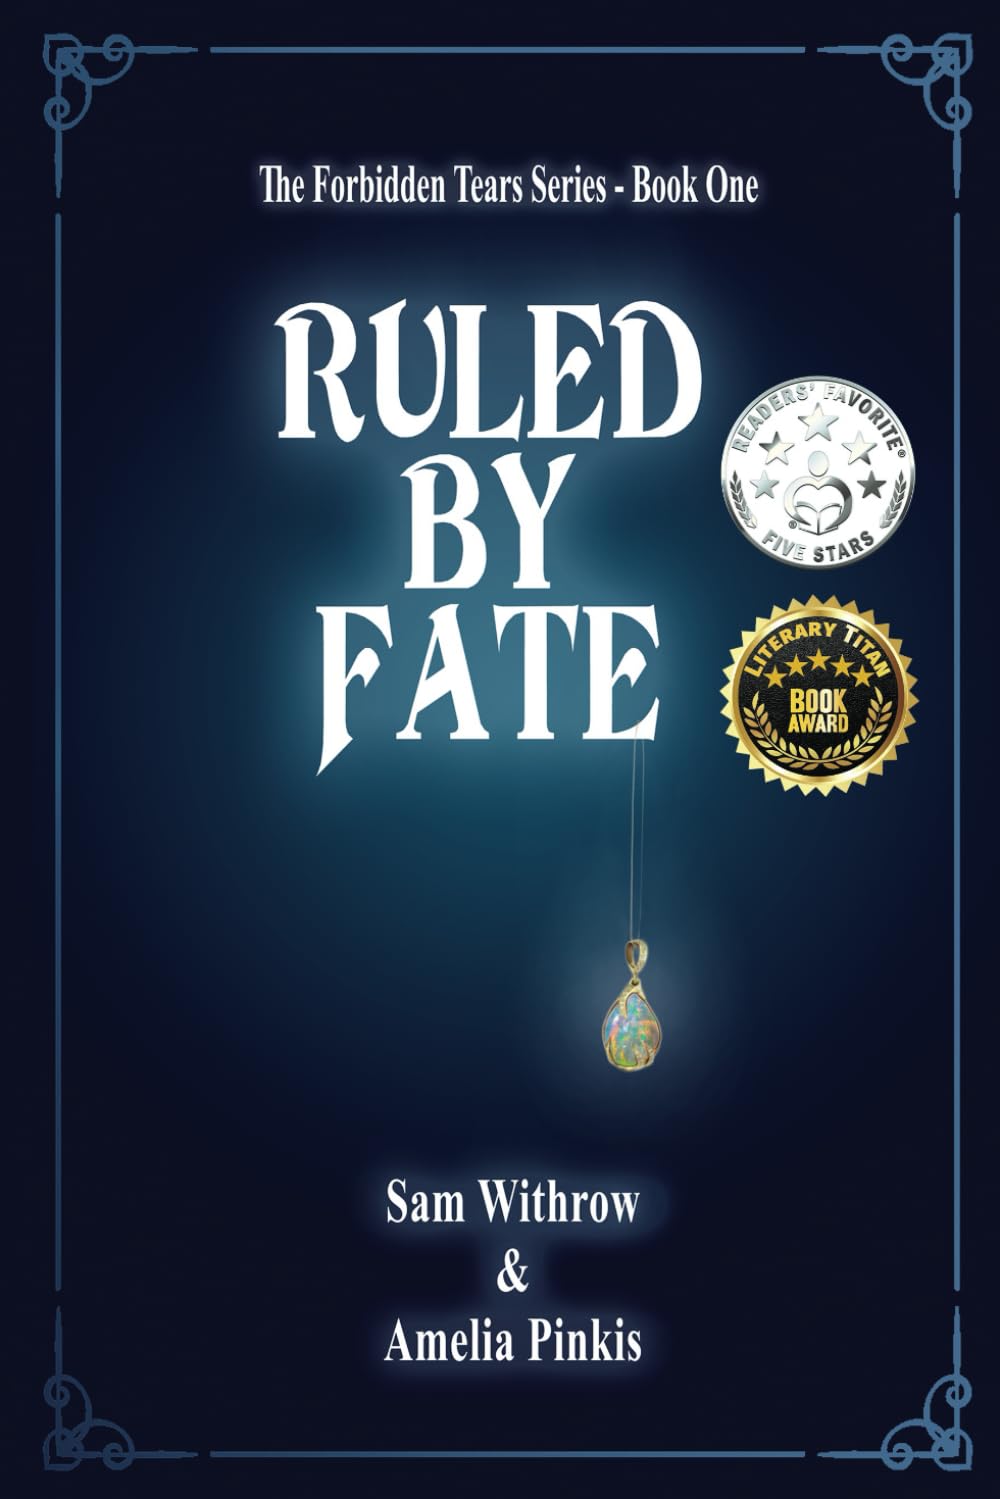 Ruled by Fate by Sam Withrow